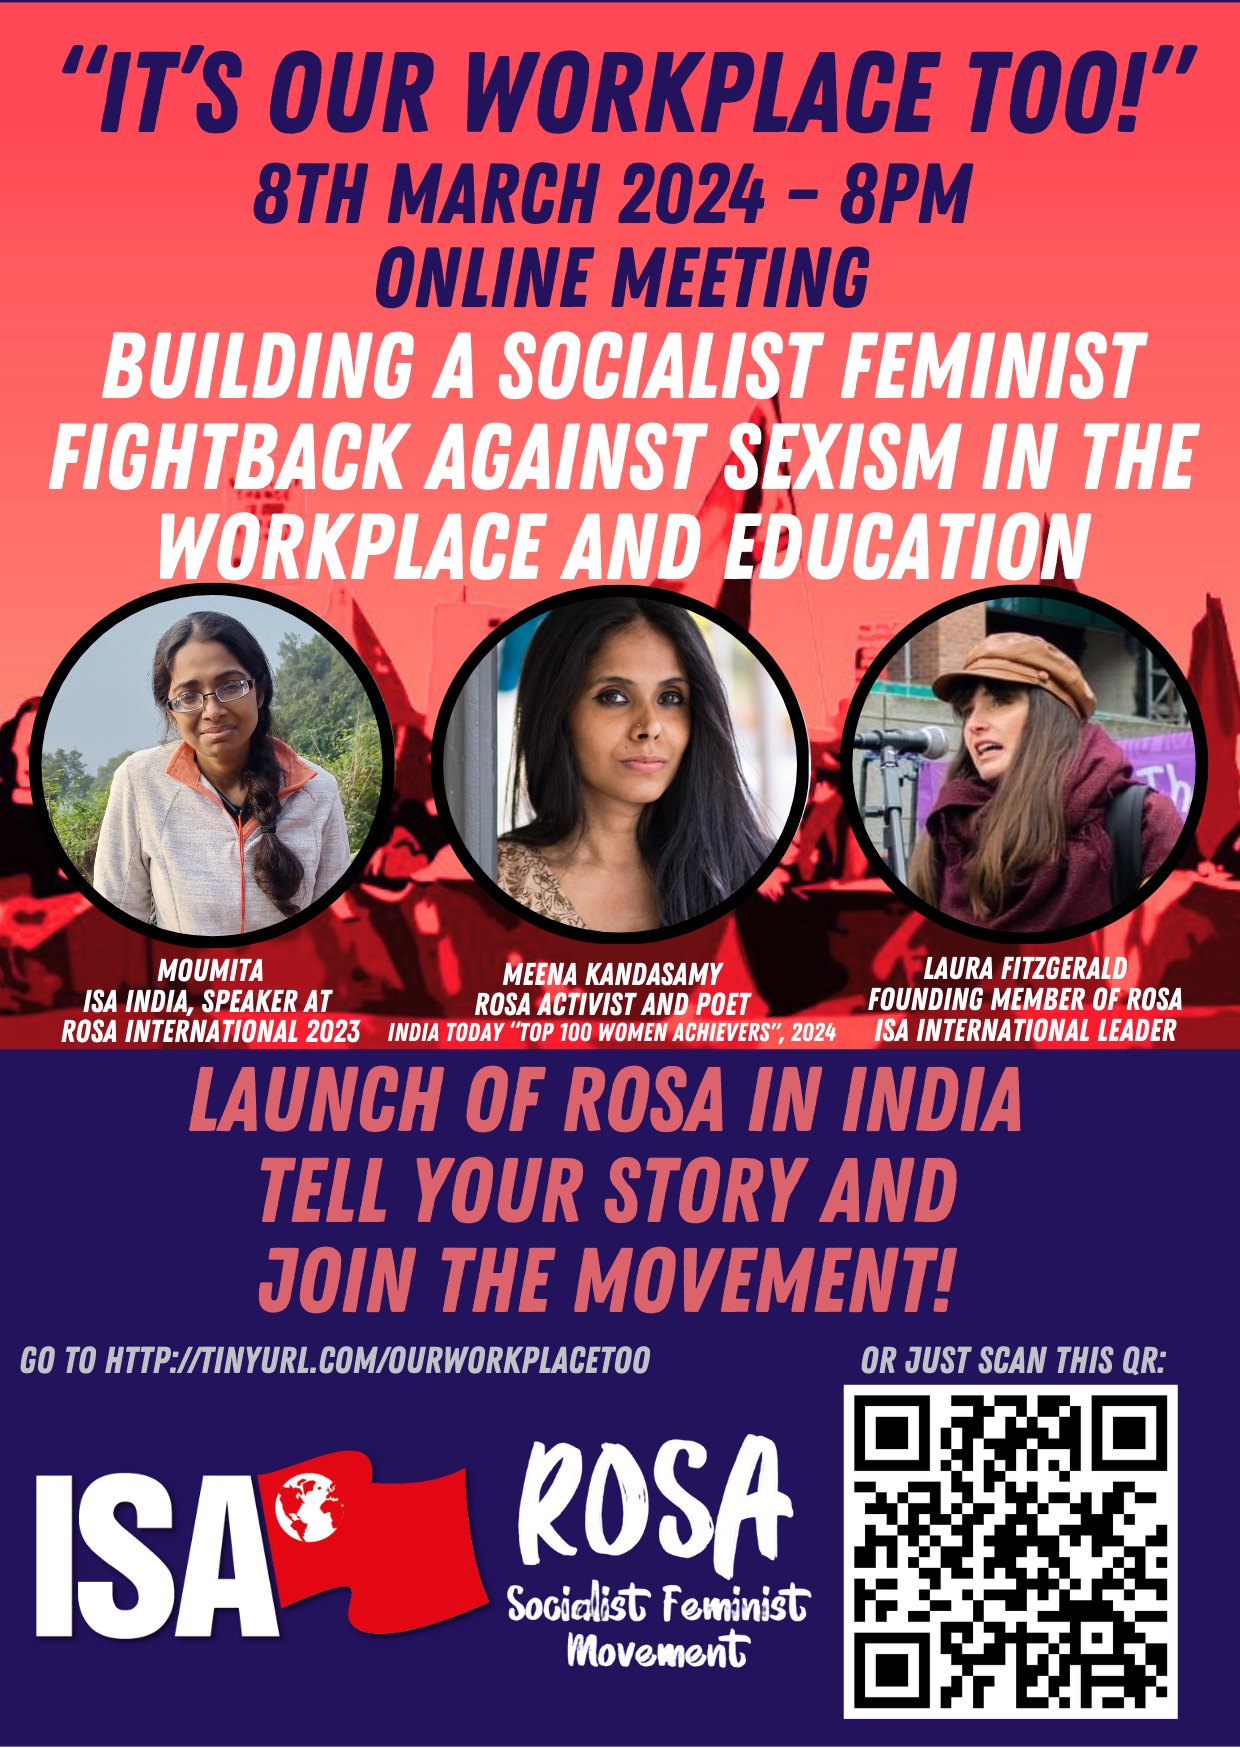 Launch of ROSA in India